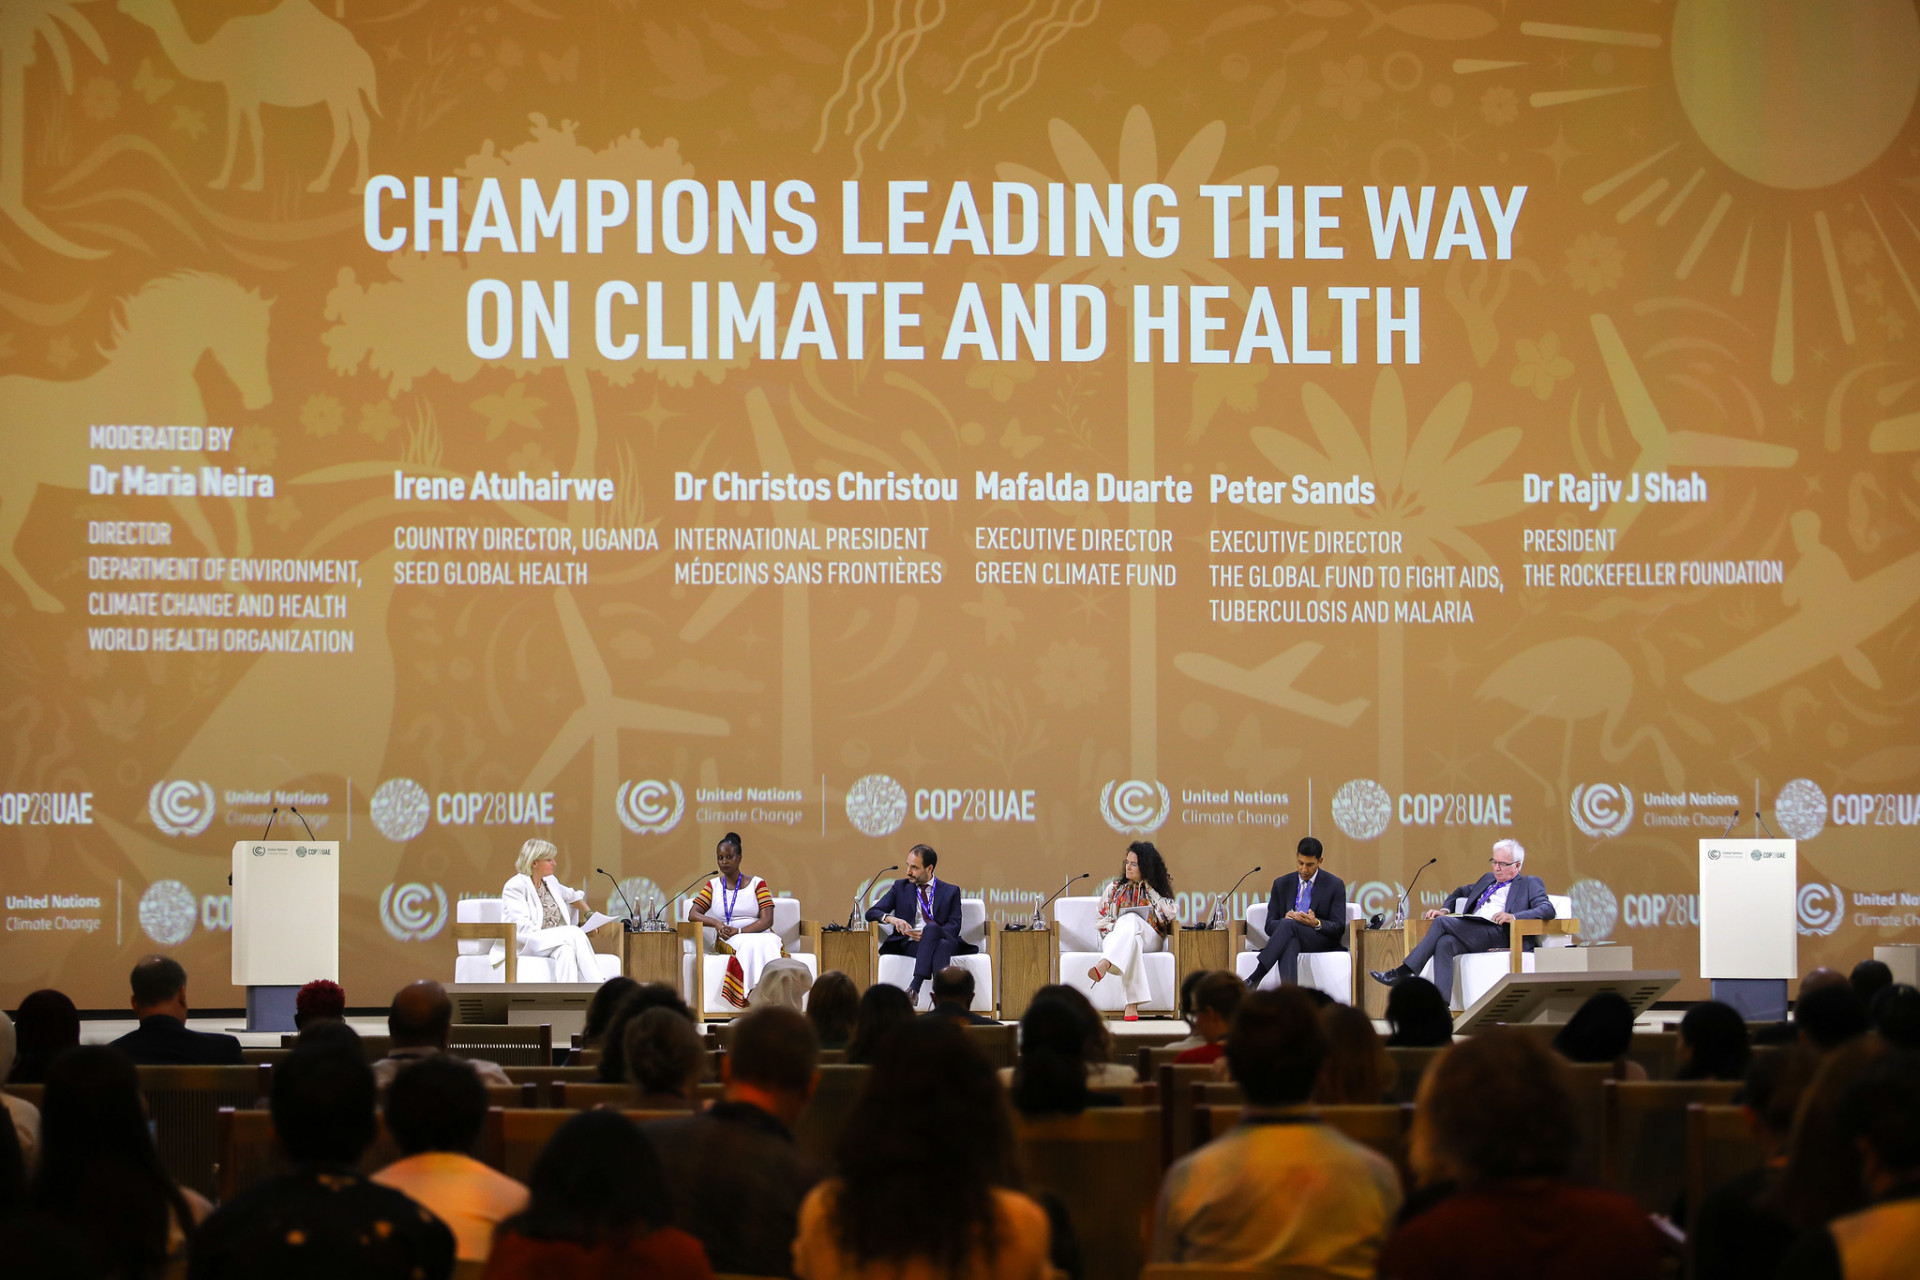 Champions leading the way on climate and health.